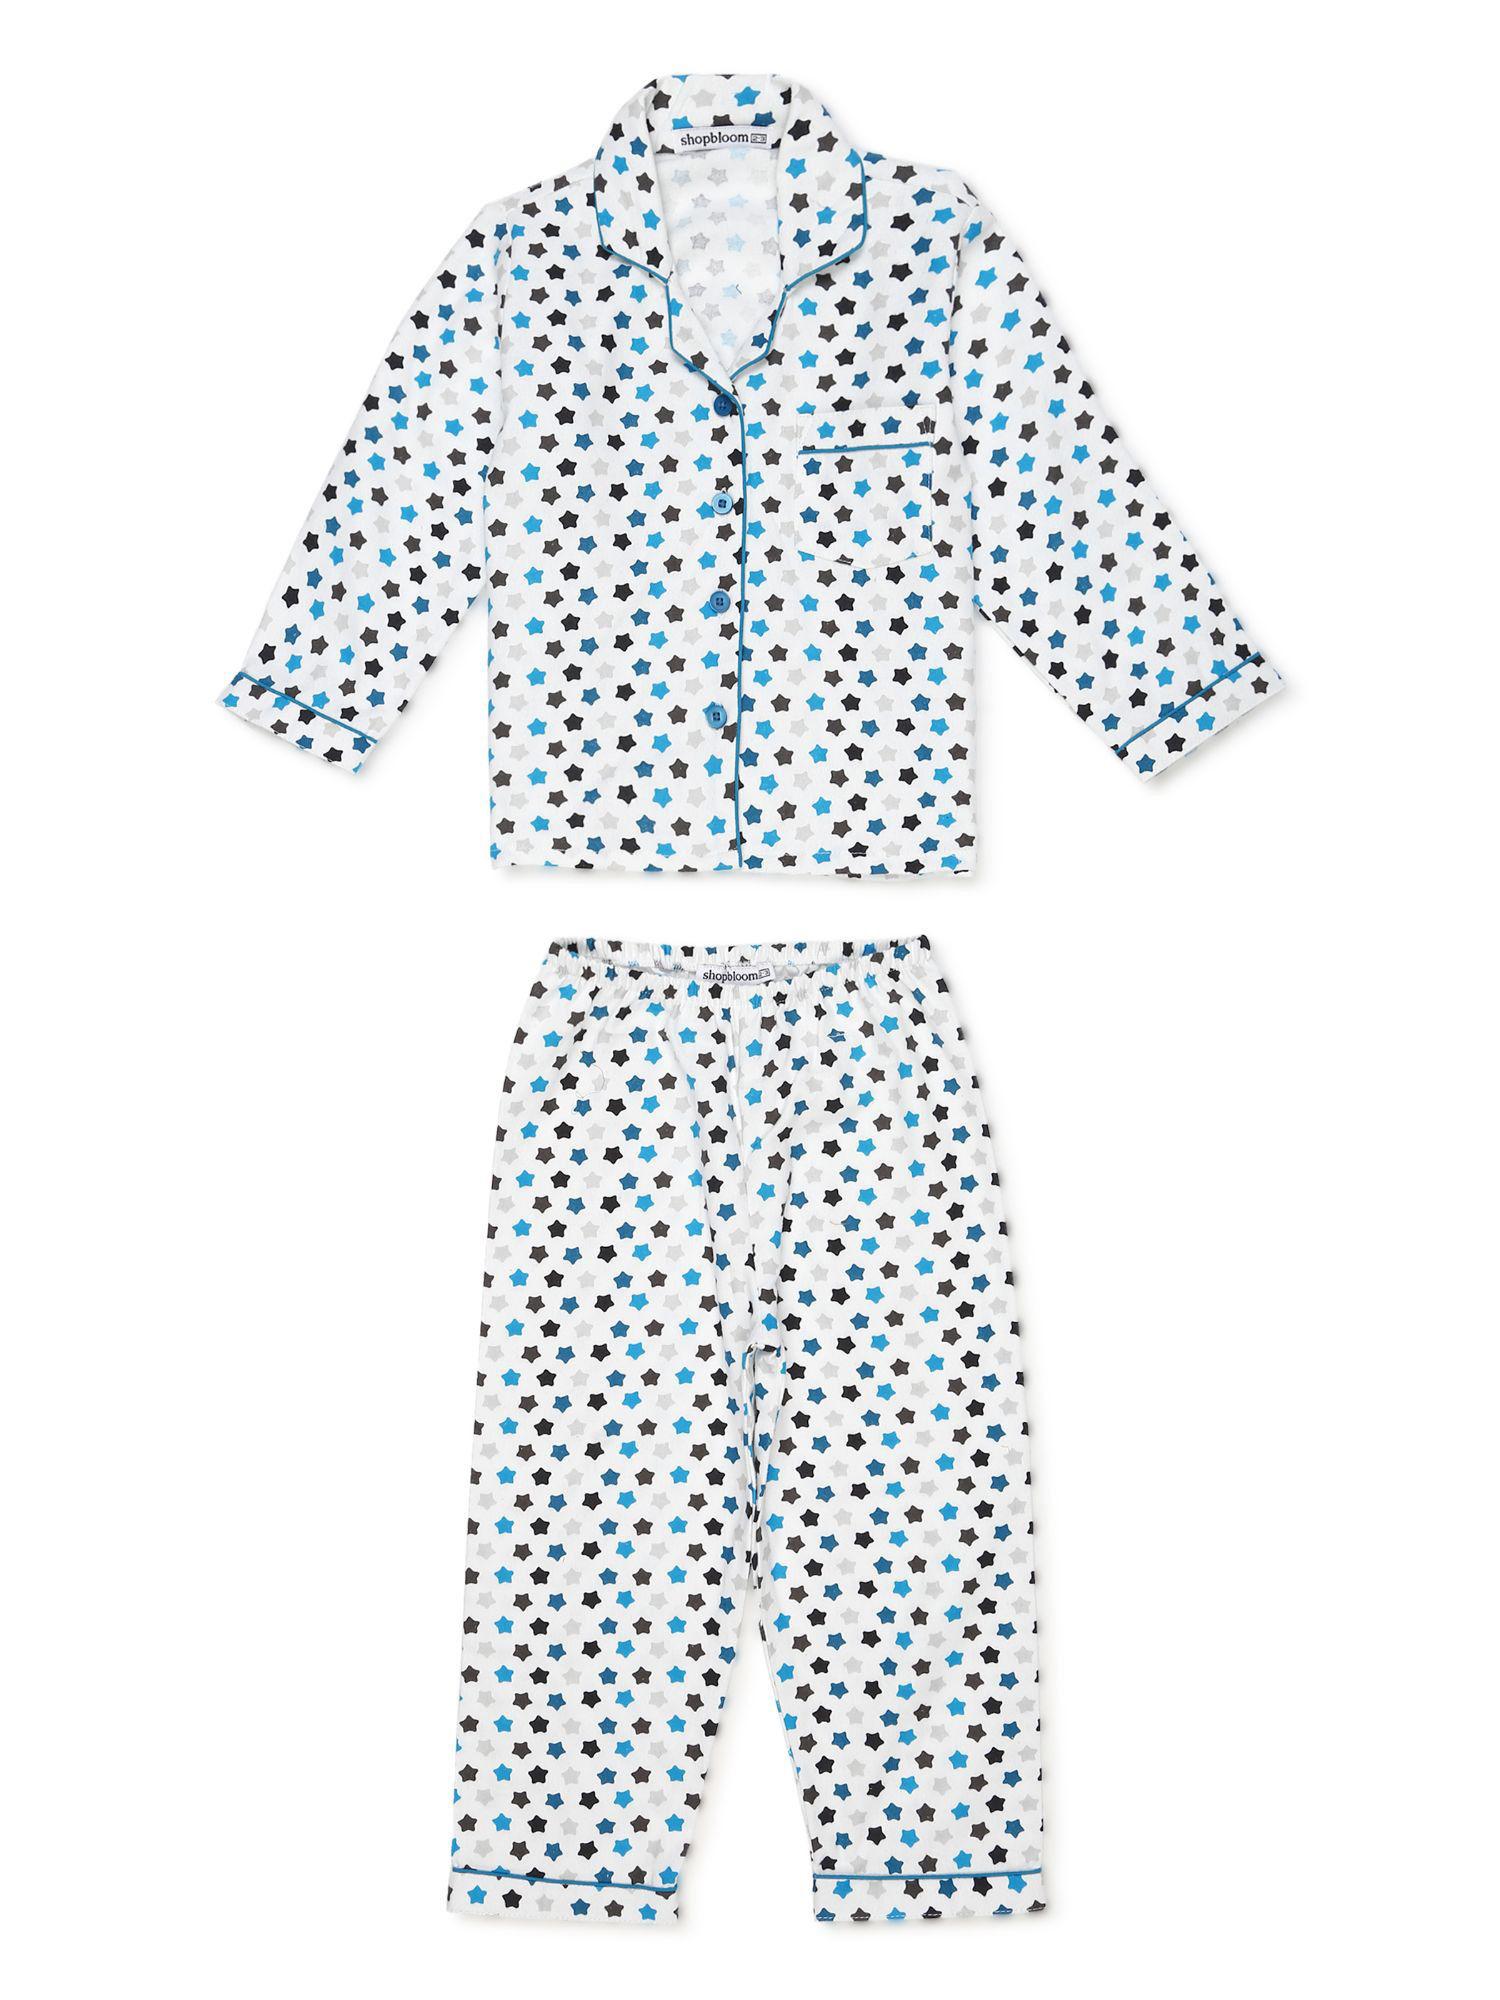 star-print-cotton-flannel-long-sleeve-kid's-night-suit